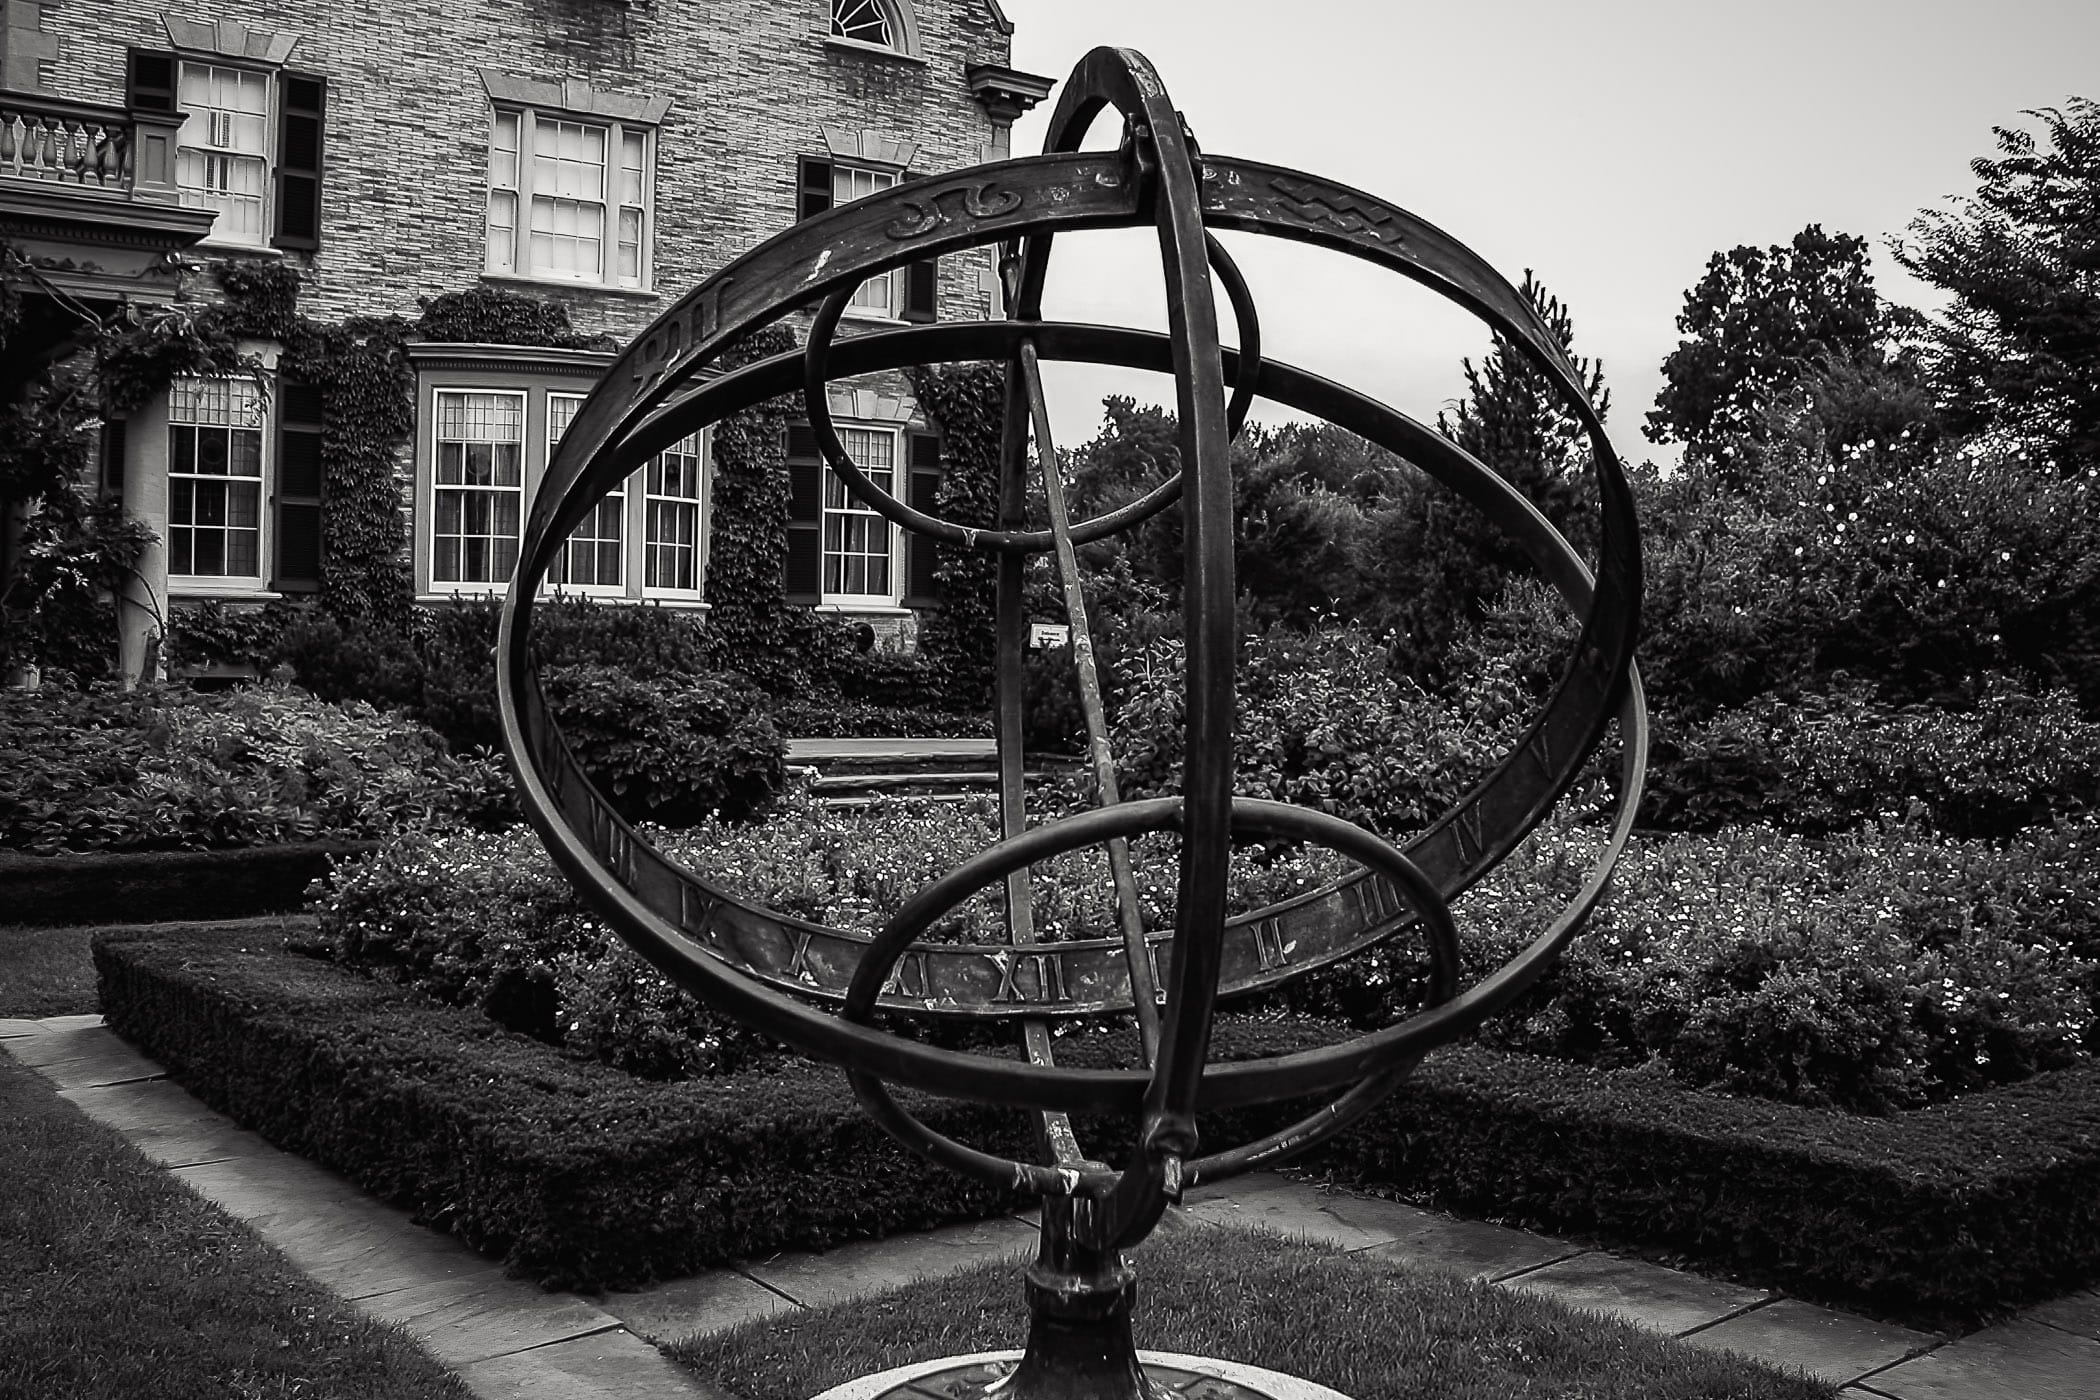 This armillary—a type of sundial—is at the George Eastman (founder of Kodak) House in Rochester, NY.